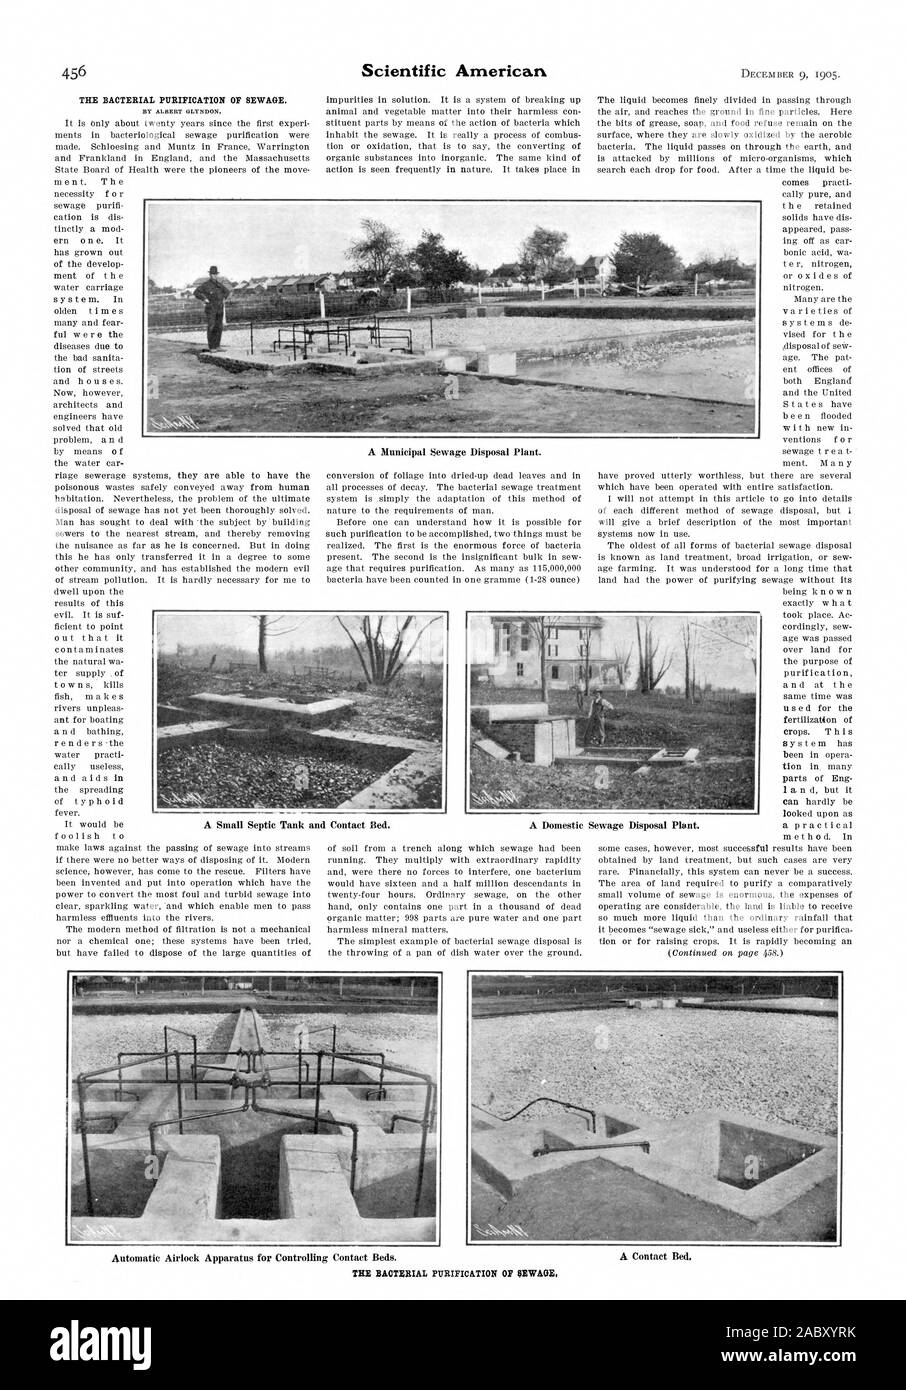 THE BACTERIAL PURIFICATION OF SEWAGE. BY ALBERT GLENDON. A Municipal Sewage Disposal Plant. A Small Septic Tank and Contact Bed. A Domestic Sewage Disposal Plant. THE BACTERIAL PURIFICATION OF SEWAGE, scientific american, 1905-12-09 Stock Photo